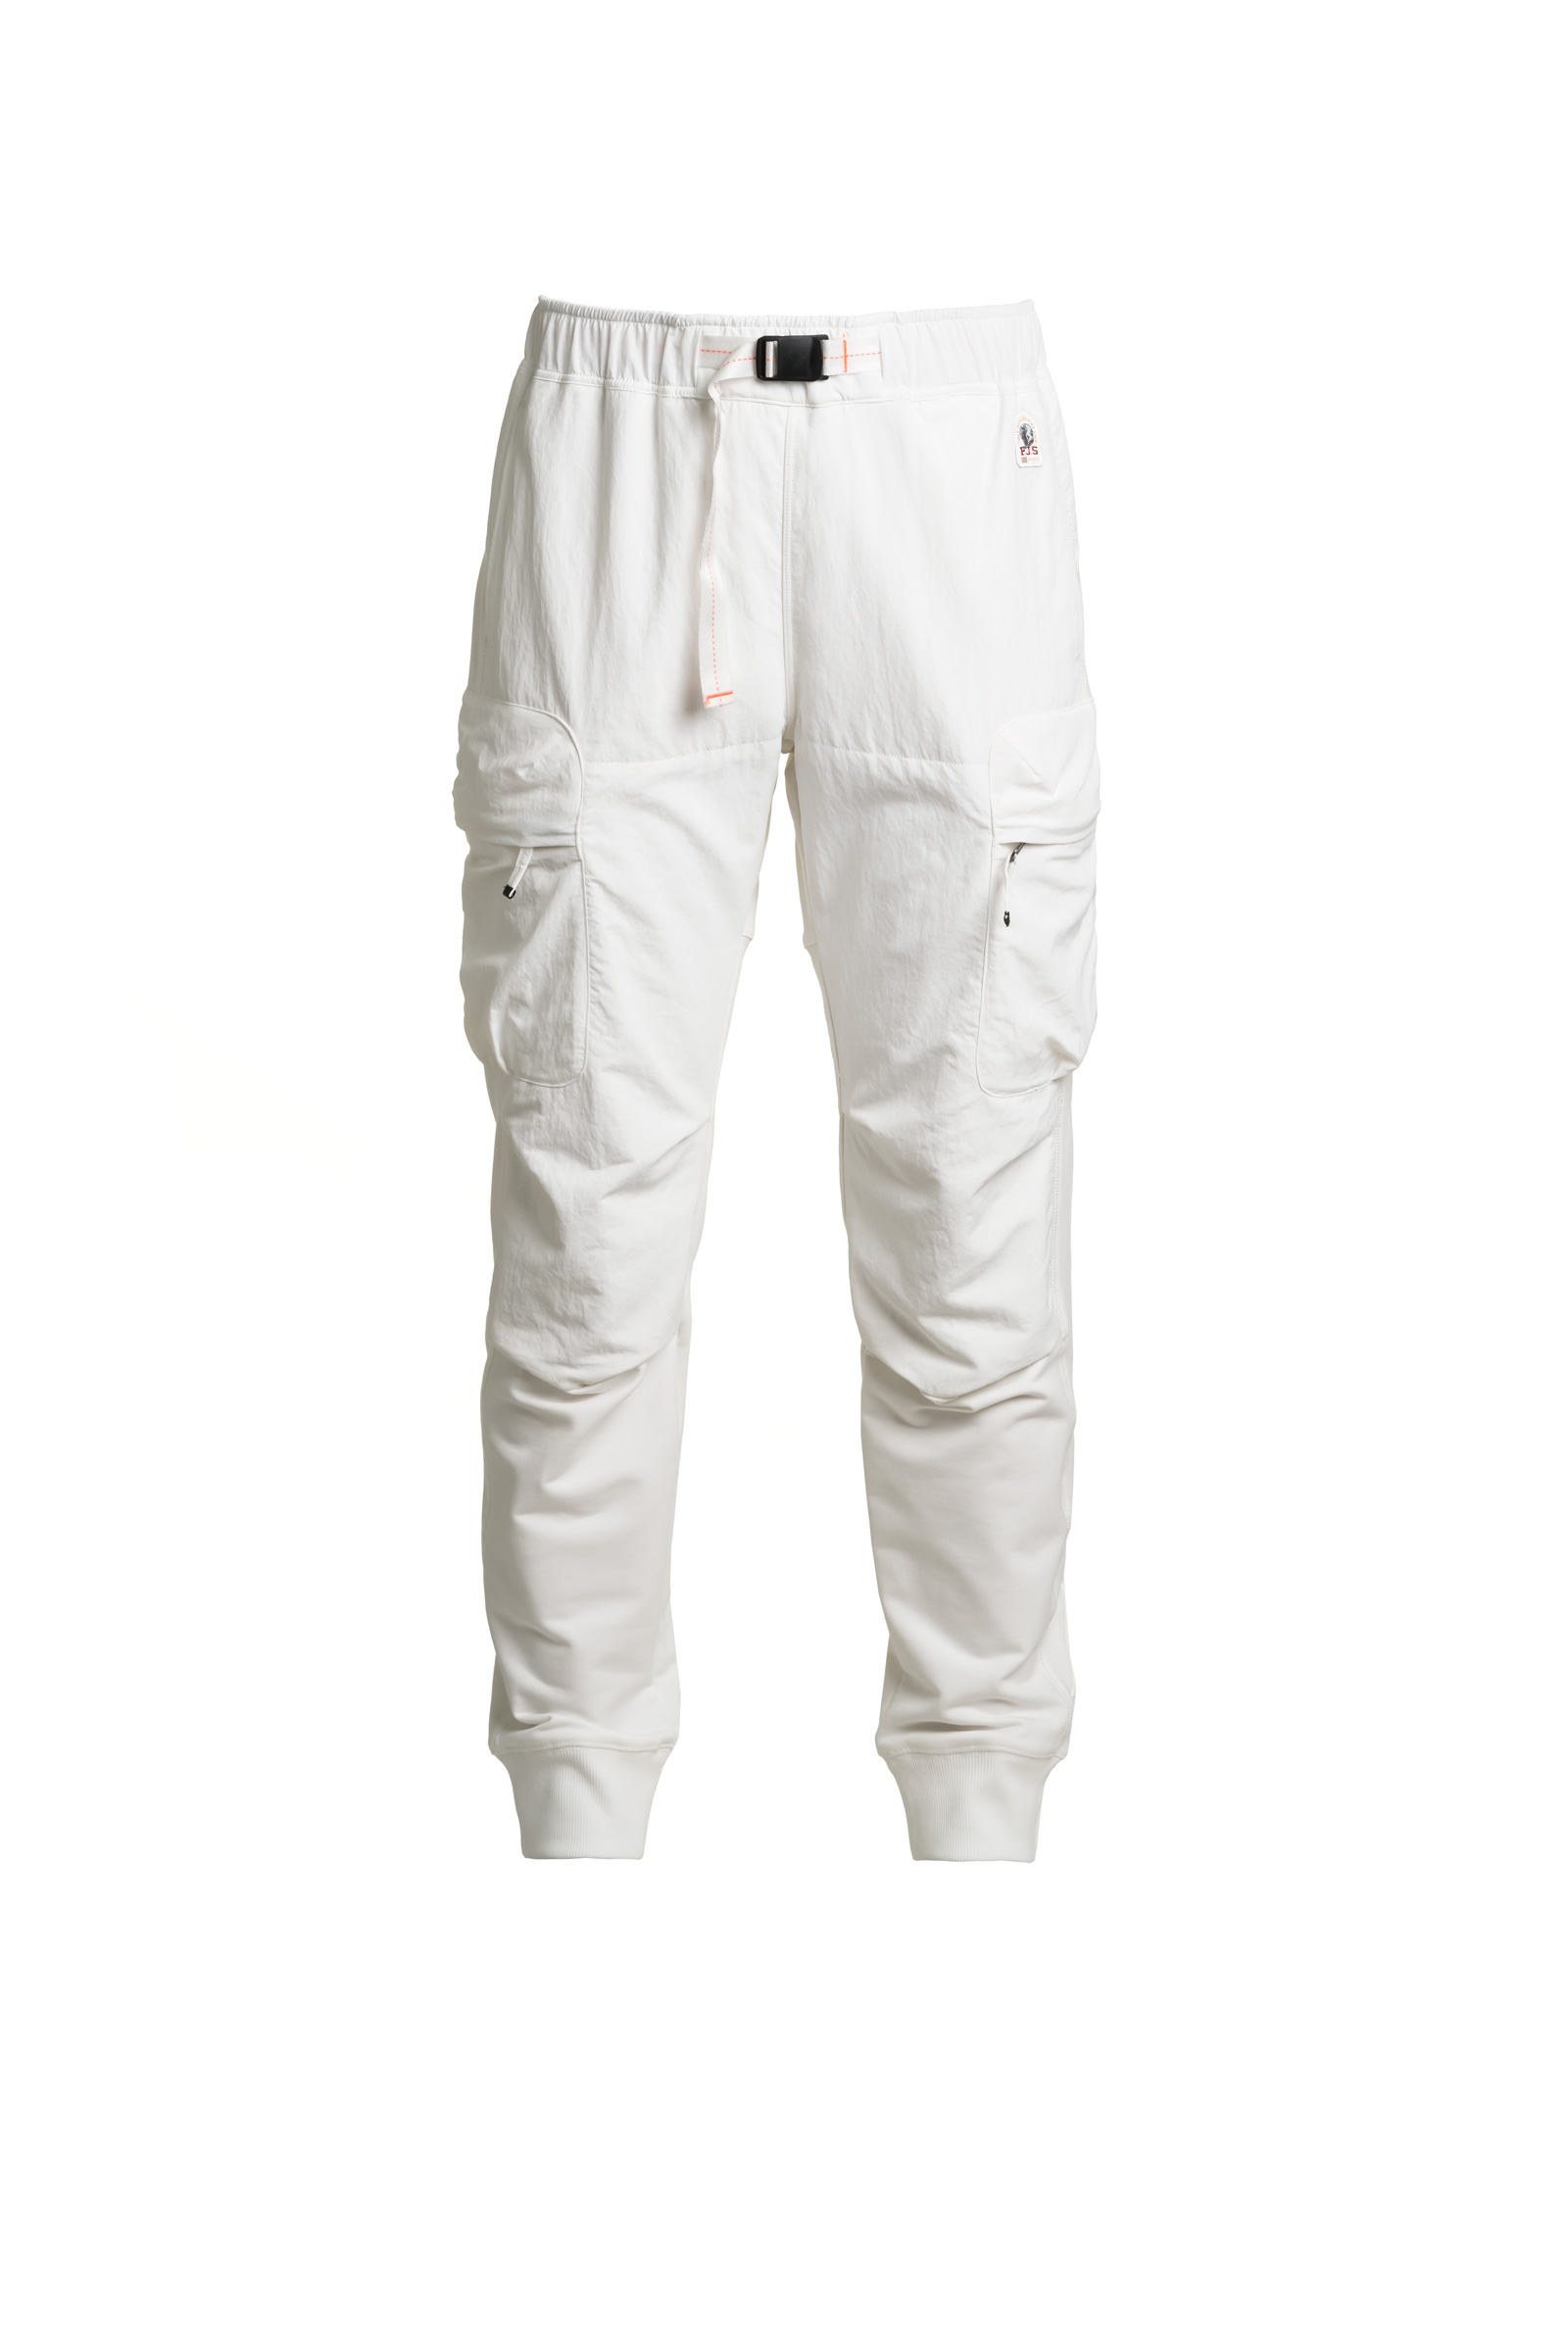 PARAJUMPERS RE33 SOAVE Damen Hose Off-White 505